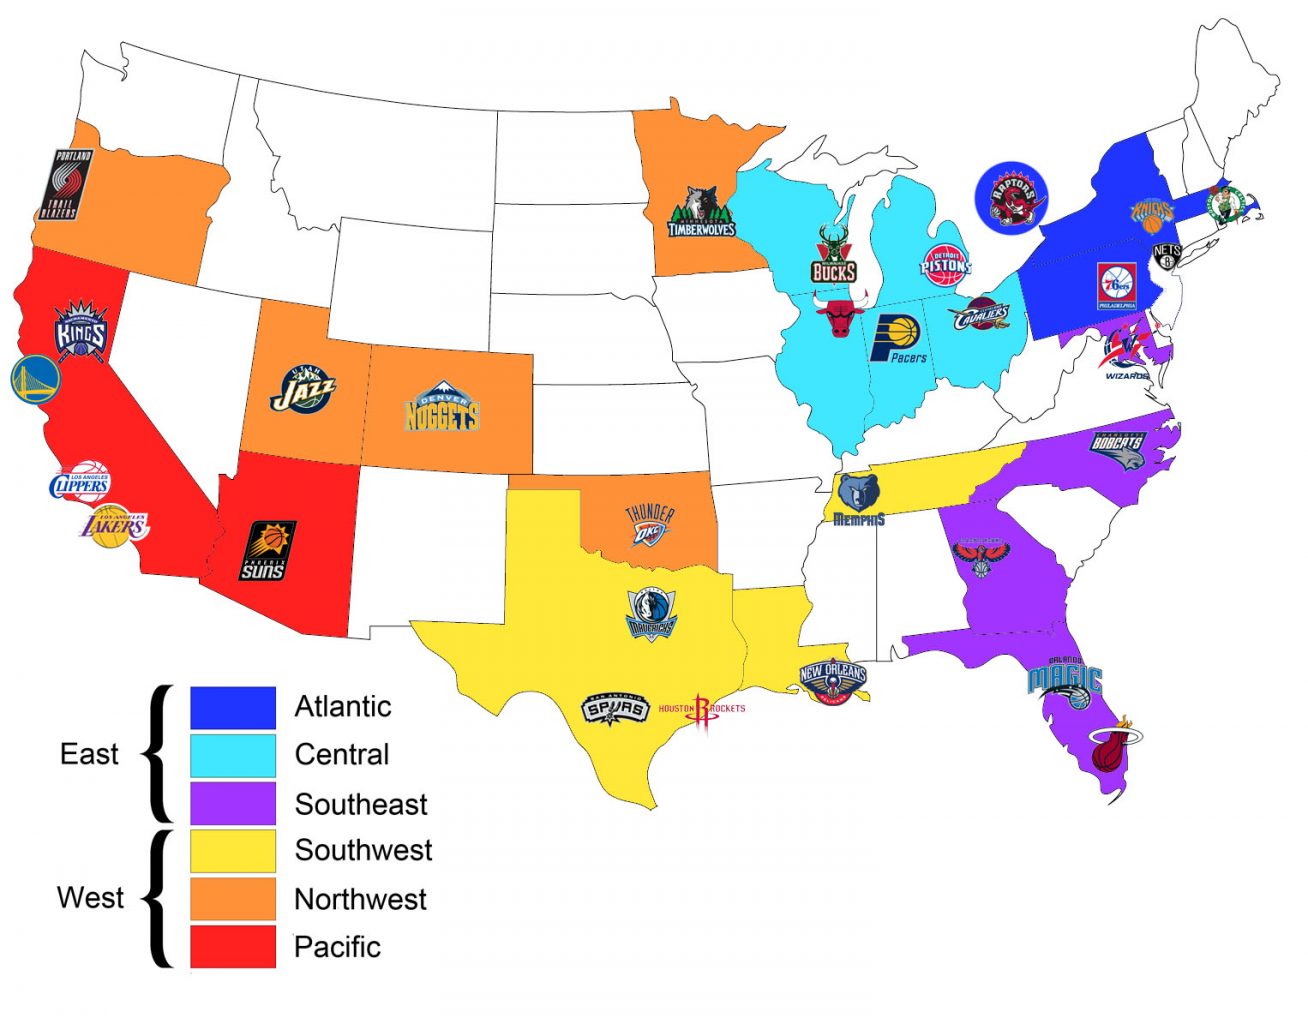 Map of NBA Teams by Conference